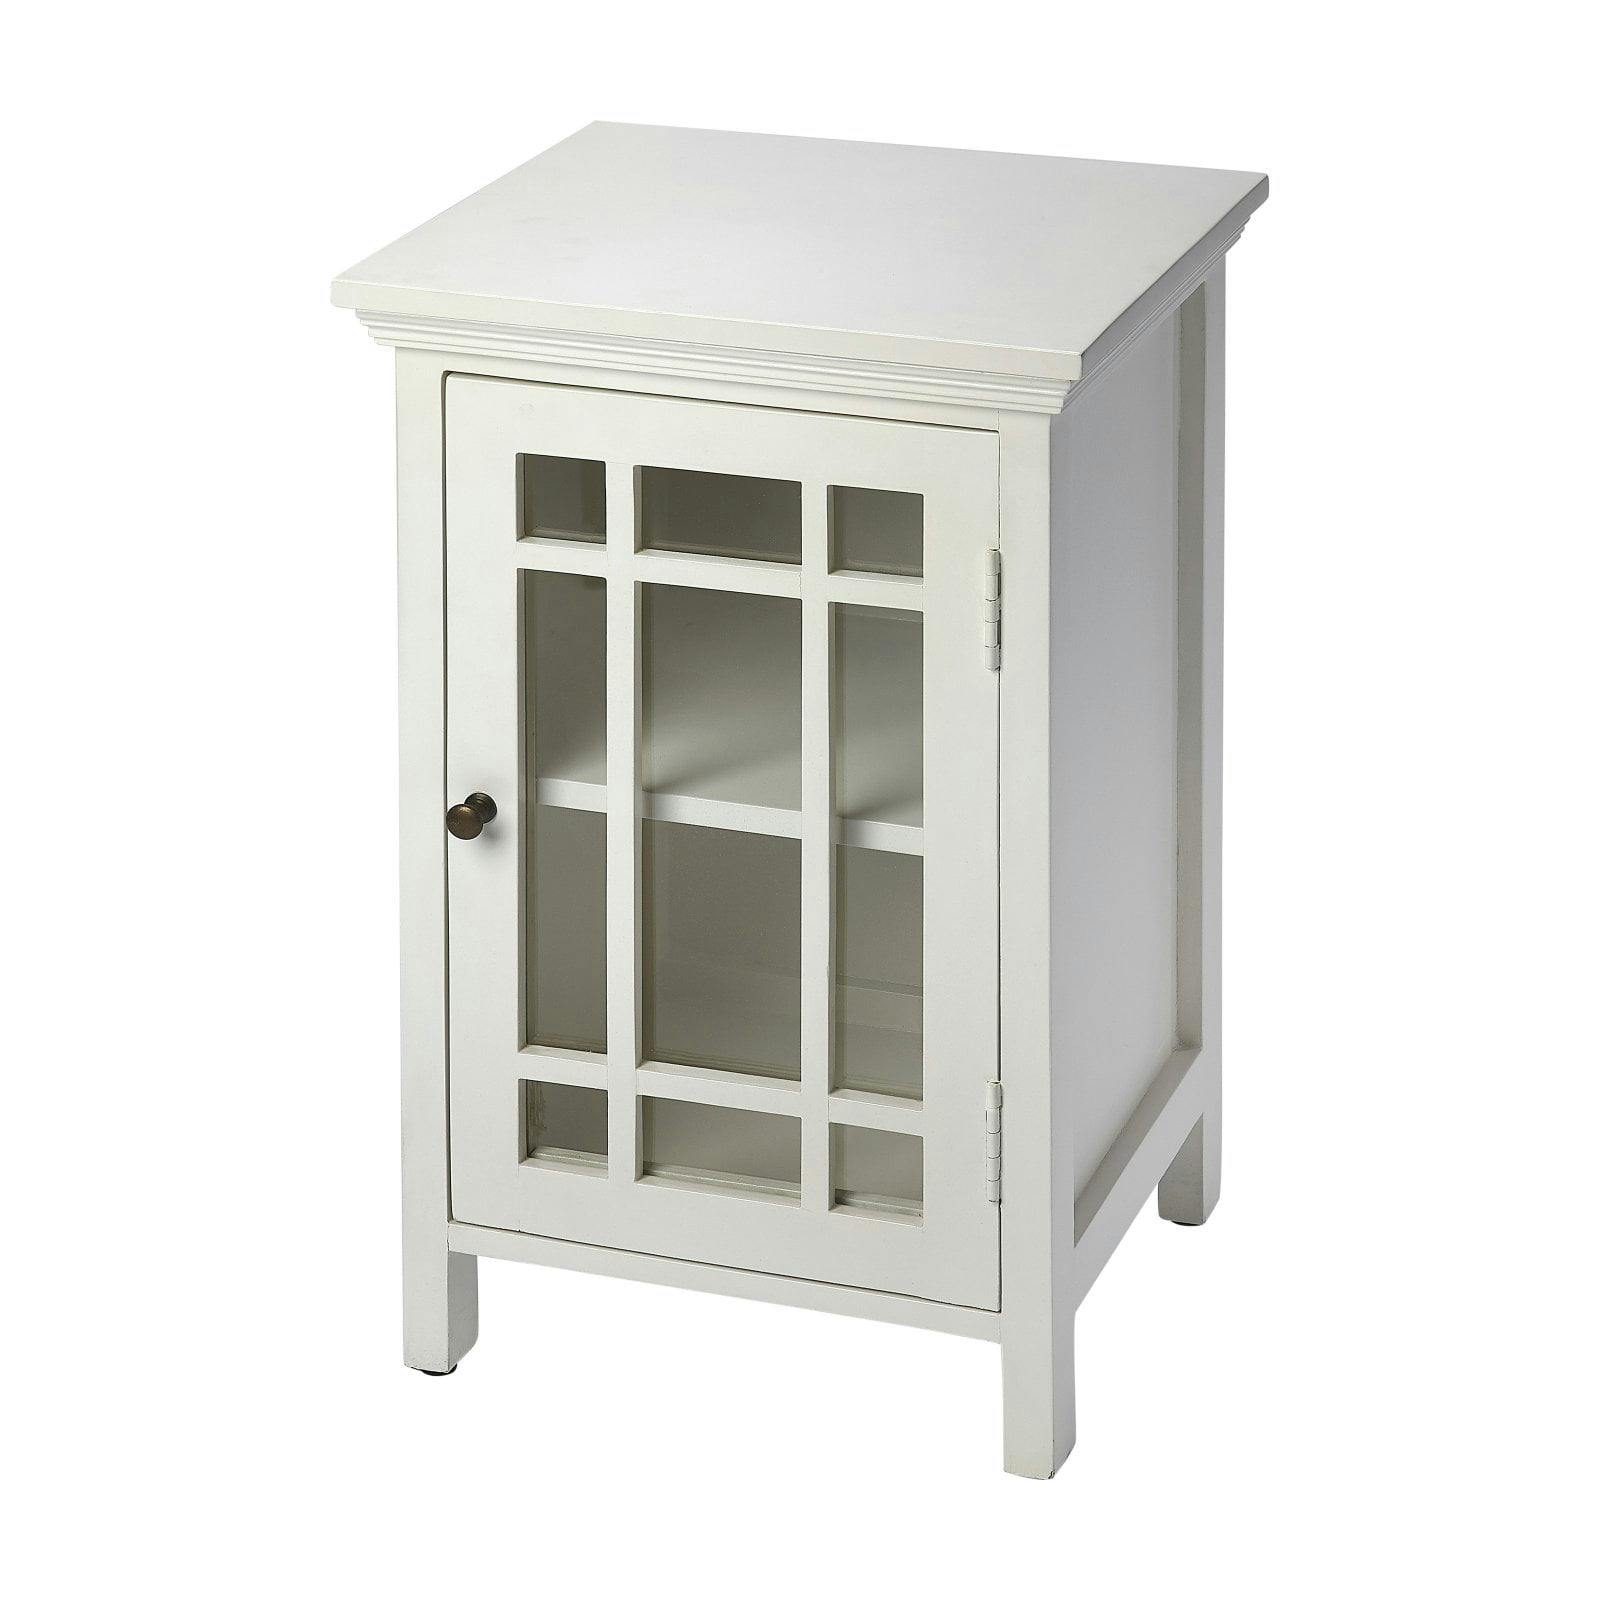 Baxter Contemporary White Chairside Chest with Gleaming Brass Accents